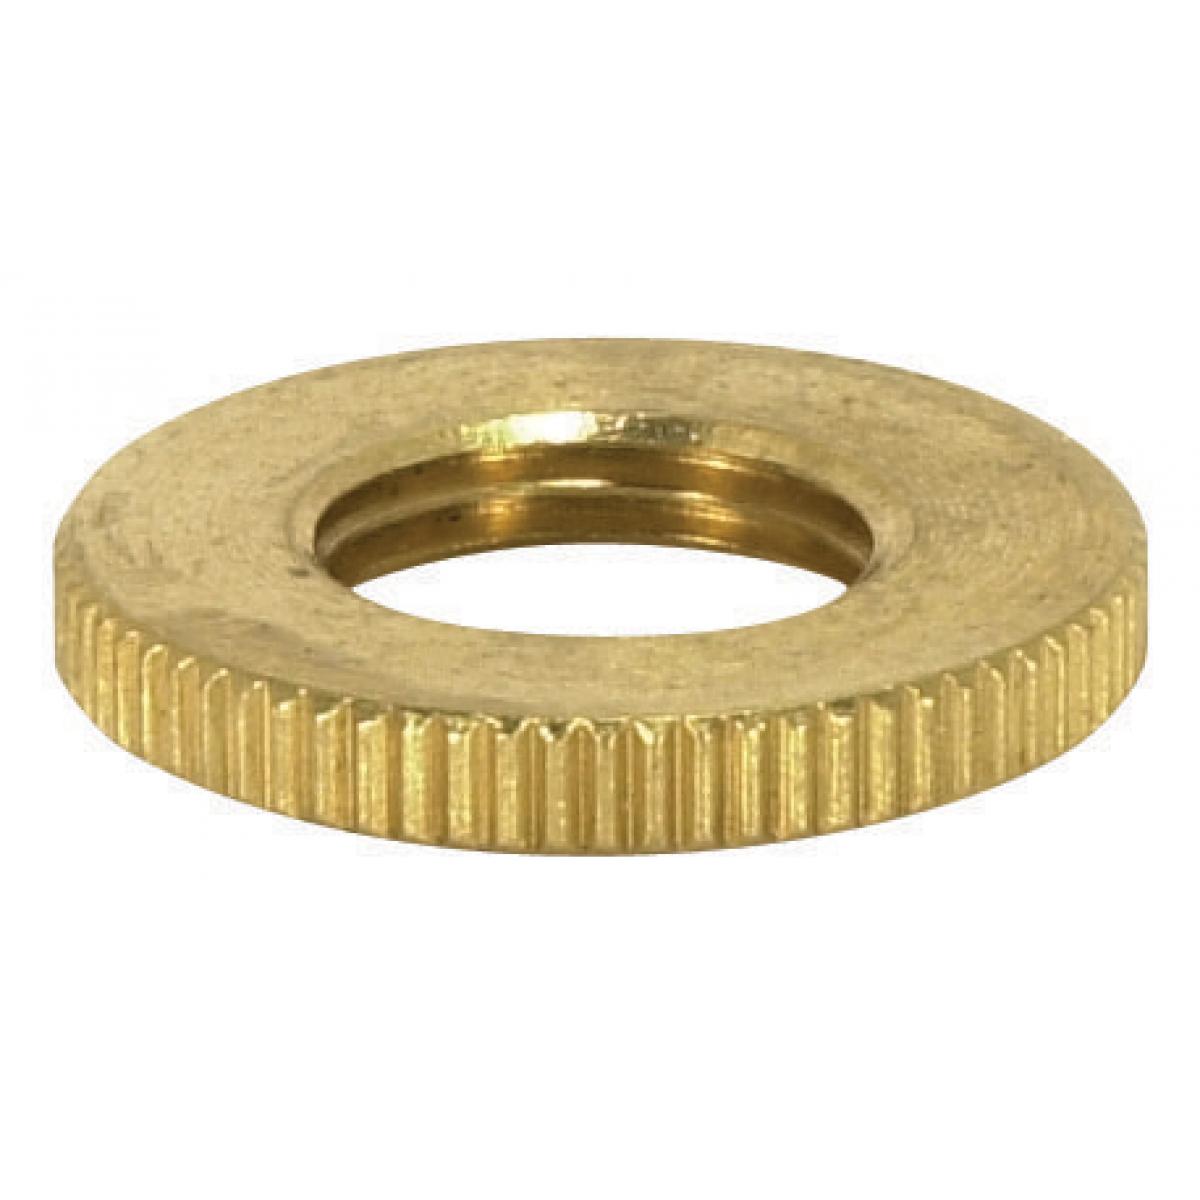 Satco 90-004 Brass Round Knurled Locknut 3/4" Diameter 1/8 IP 3/32" Thick Burnished And Lacquered